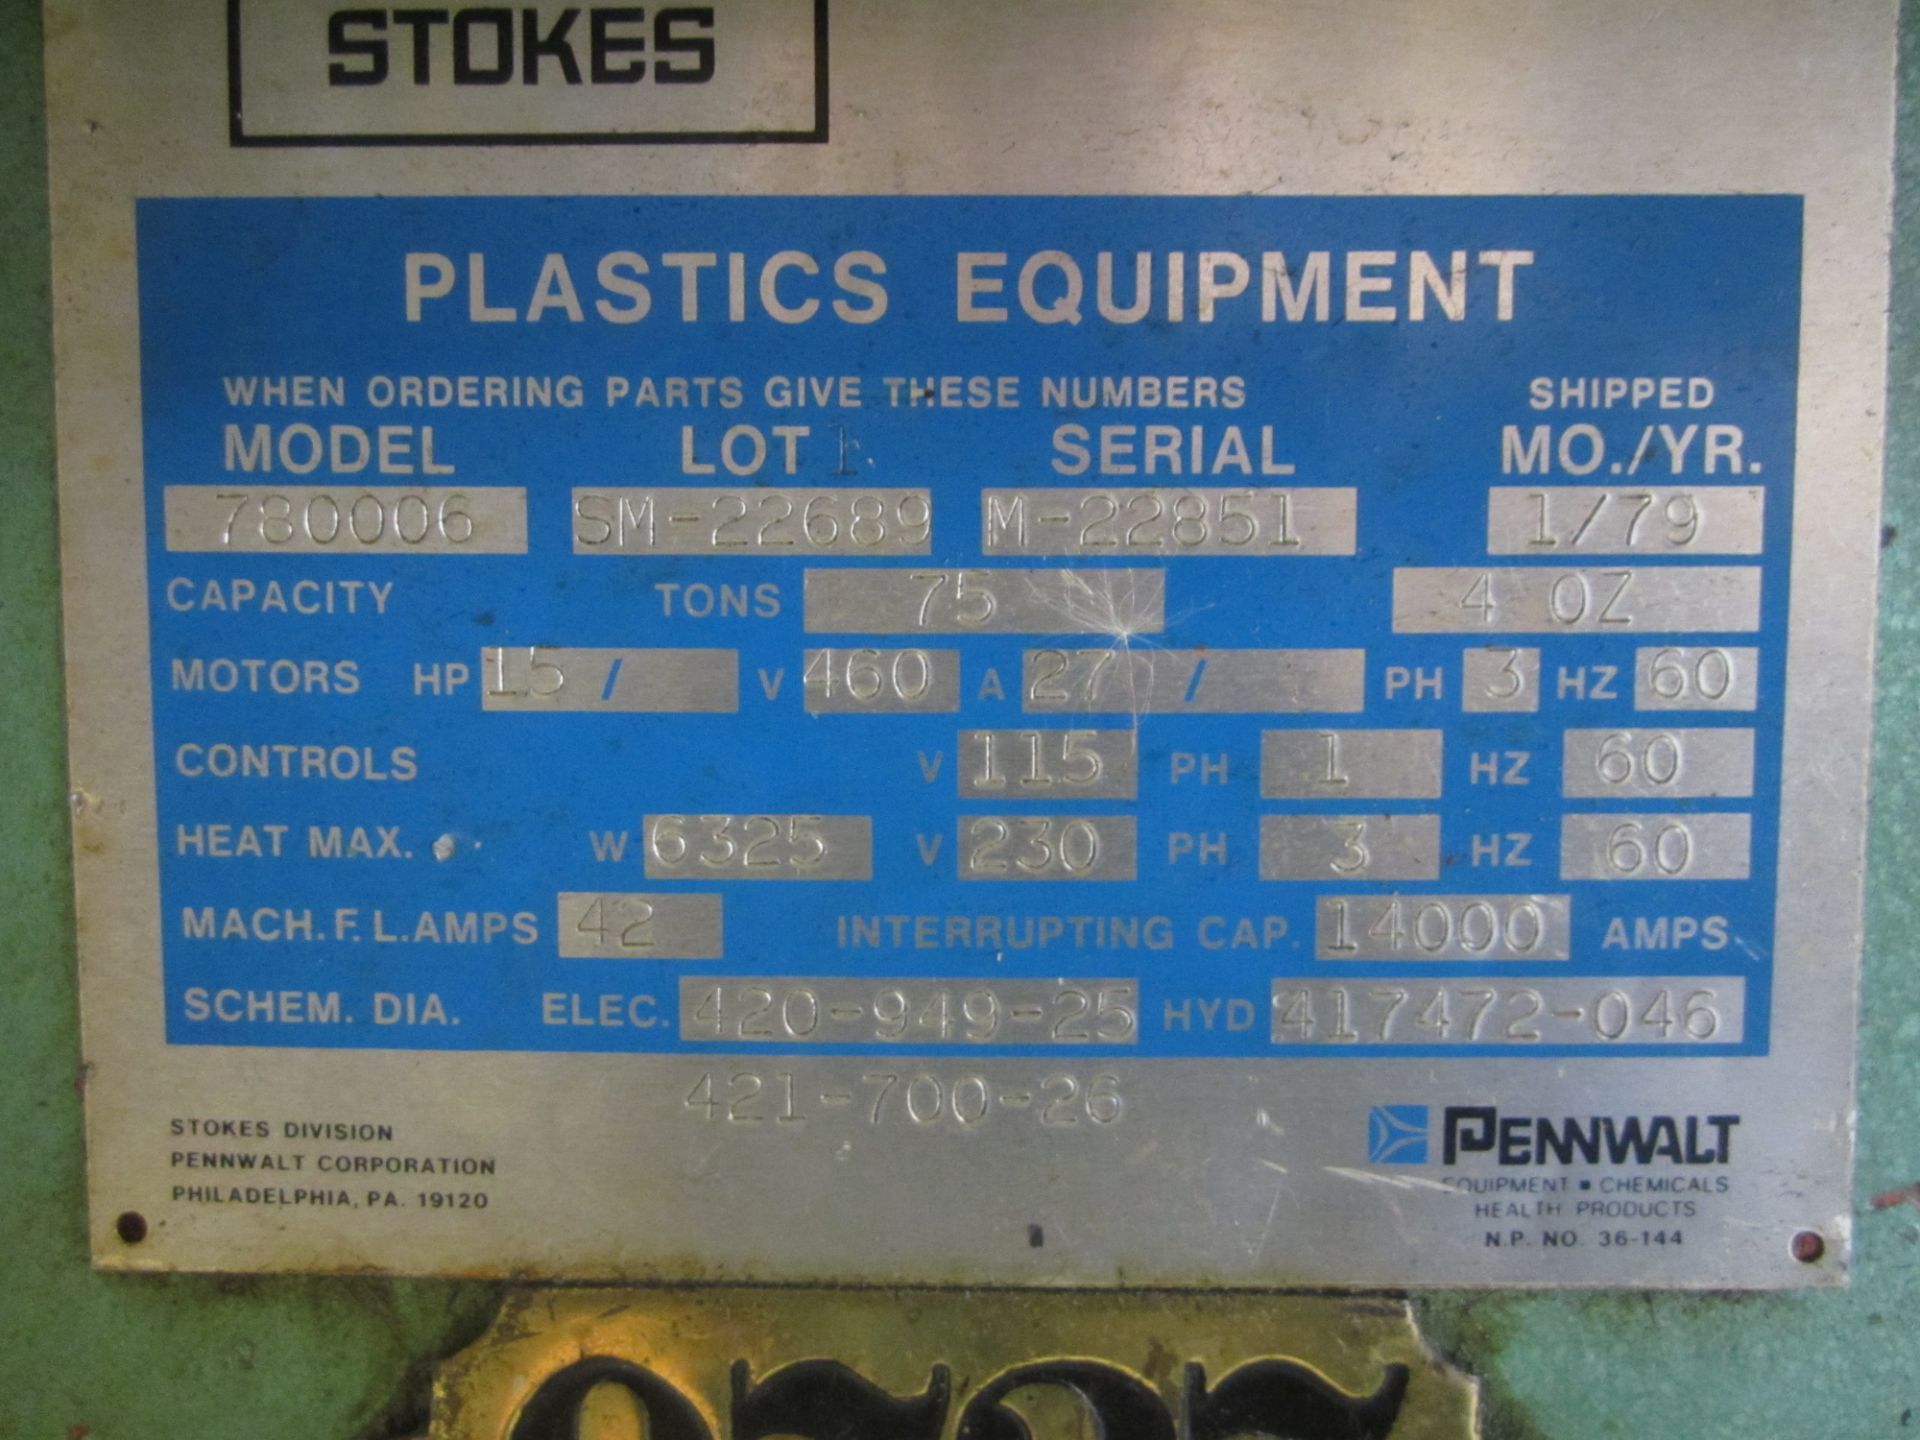 Stokes Penwalt Model 780006 Plastic Injection Mold Machine, s/n M-22851, 75 Ton, 4 Ounce, Loading - Image 5 of 5